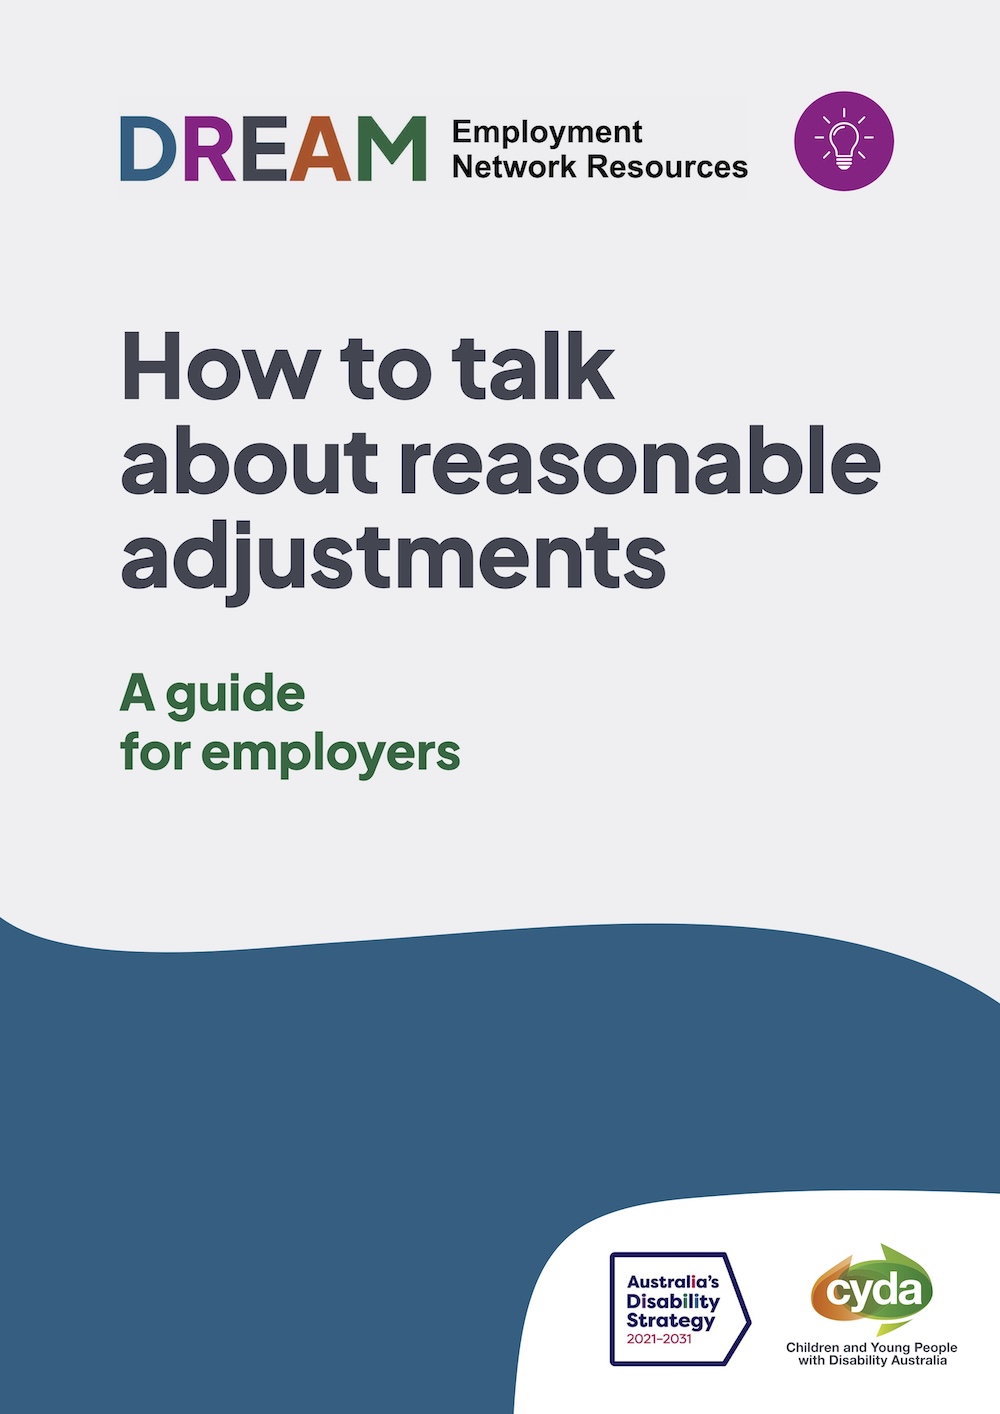 PDF Cover titled "Talking about adjustments, a guide for employers" with the logo for the DREAM Employment Network with a purple lightbulb graphic up the top, and the logos for the Australian Disability Strategy and CYDA down the bottom.